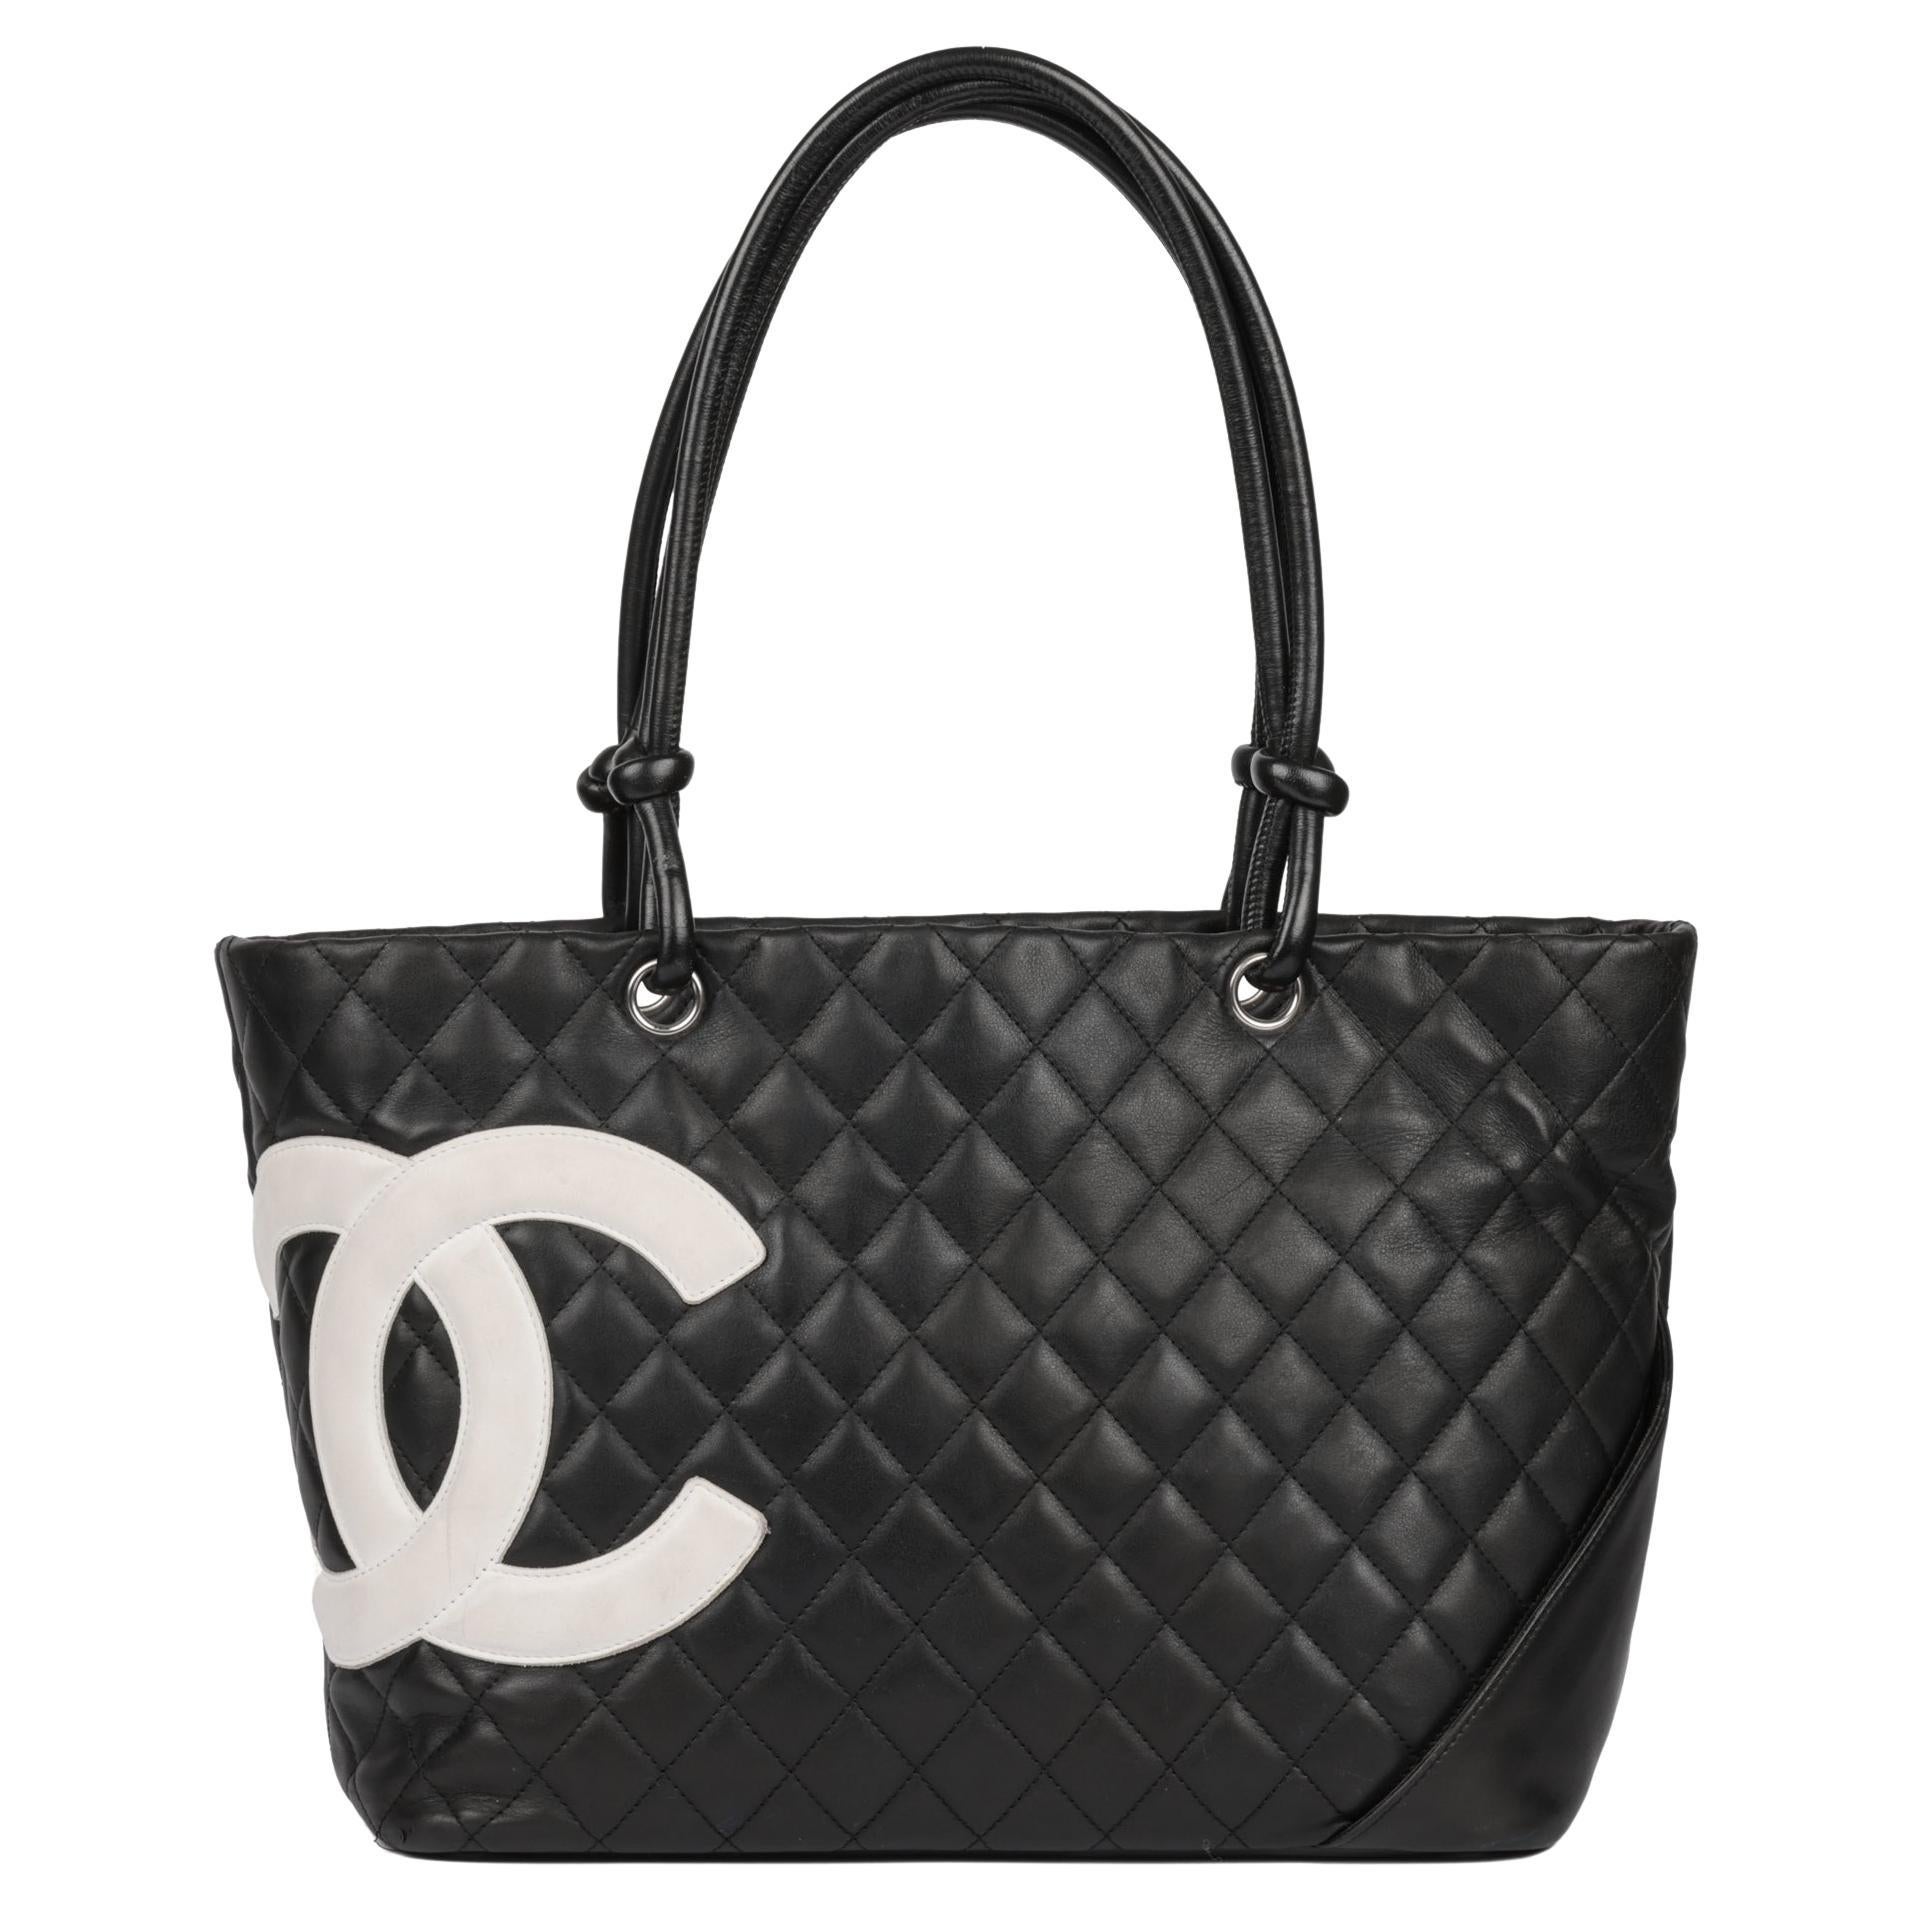 CHANEL Black Quilted Lambskin Small Cambon Tote Bag 